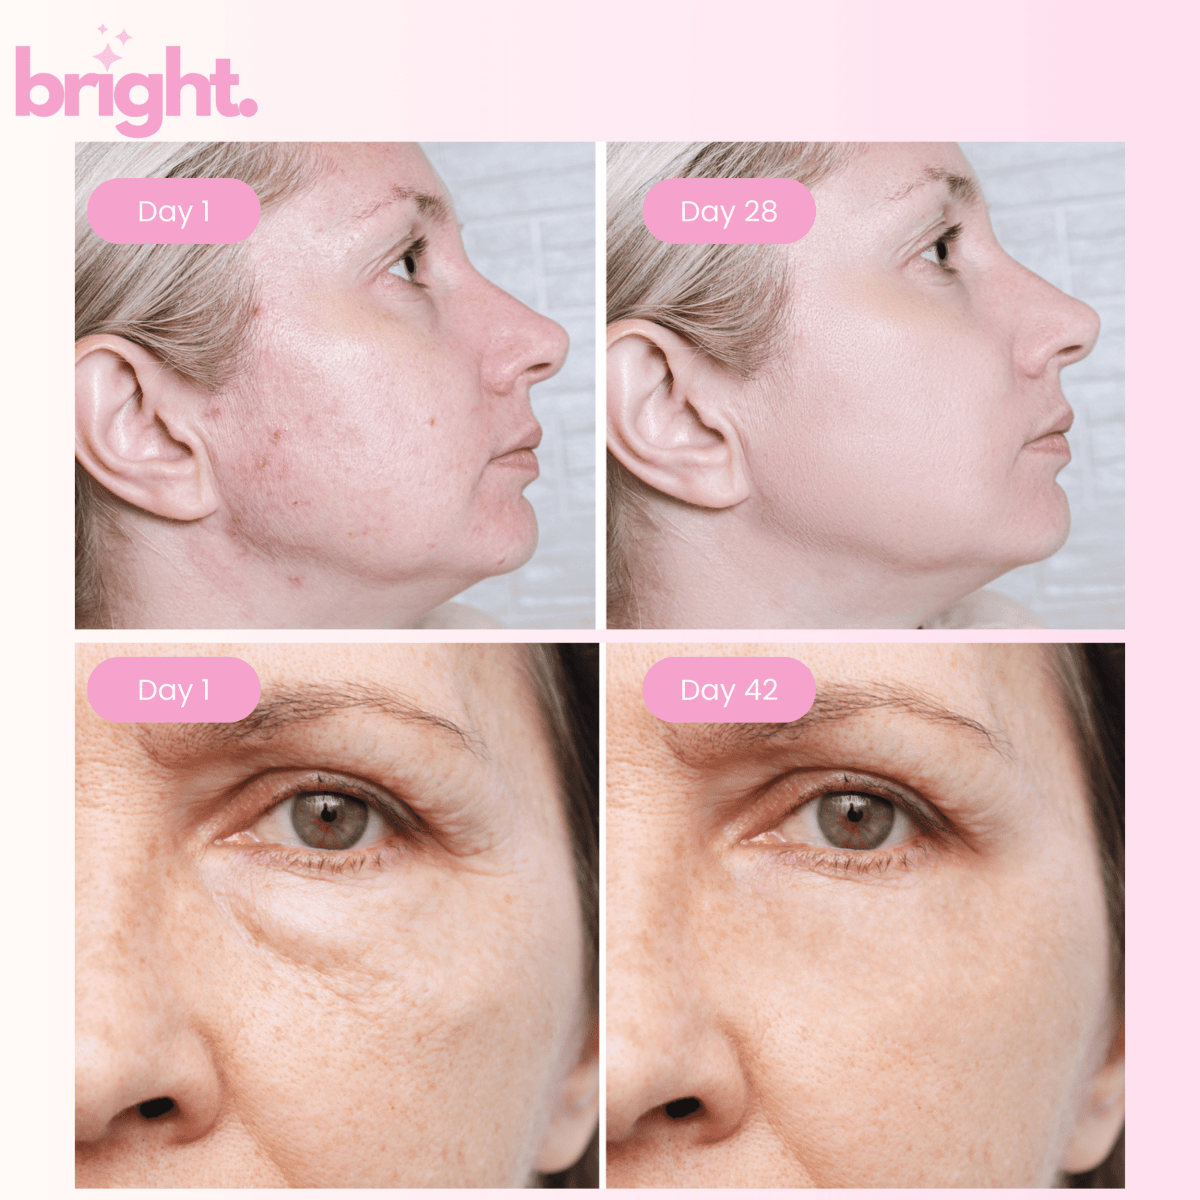 Before and after of women using the LED redlight therapy wand, showing less acne and smoother skin